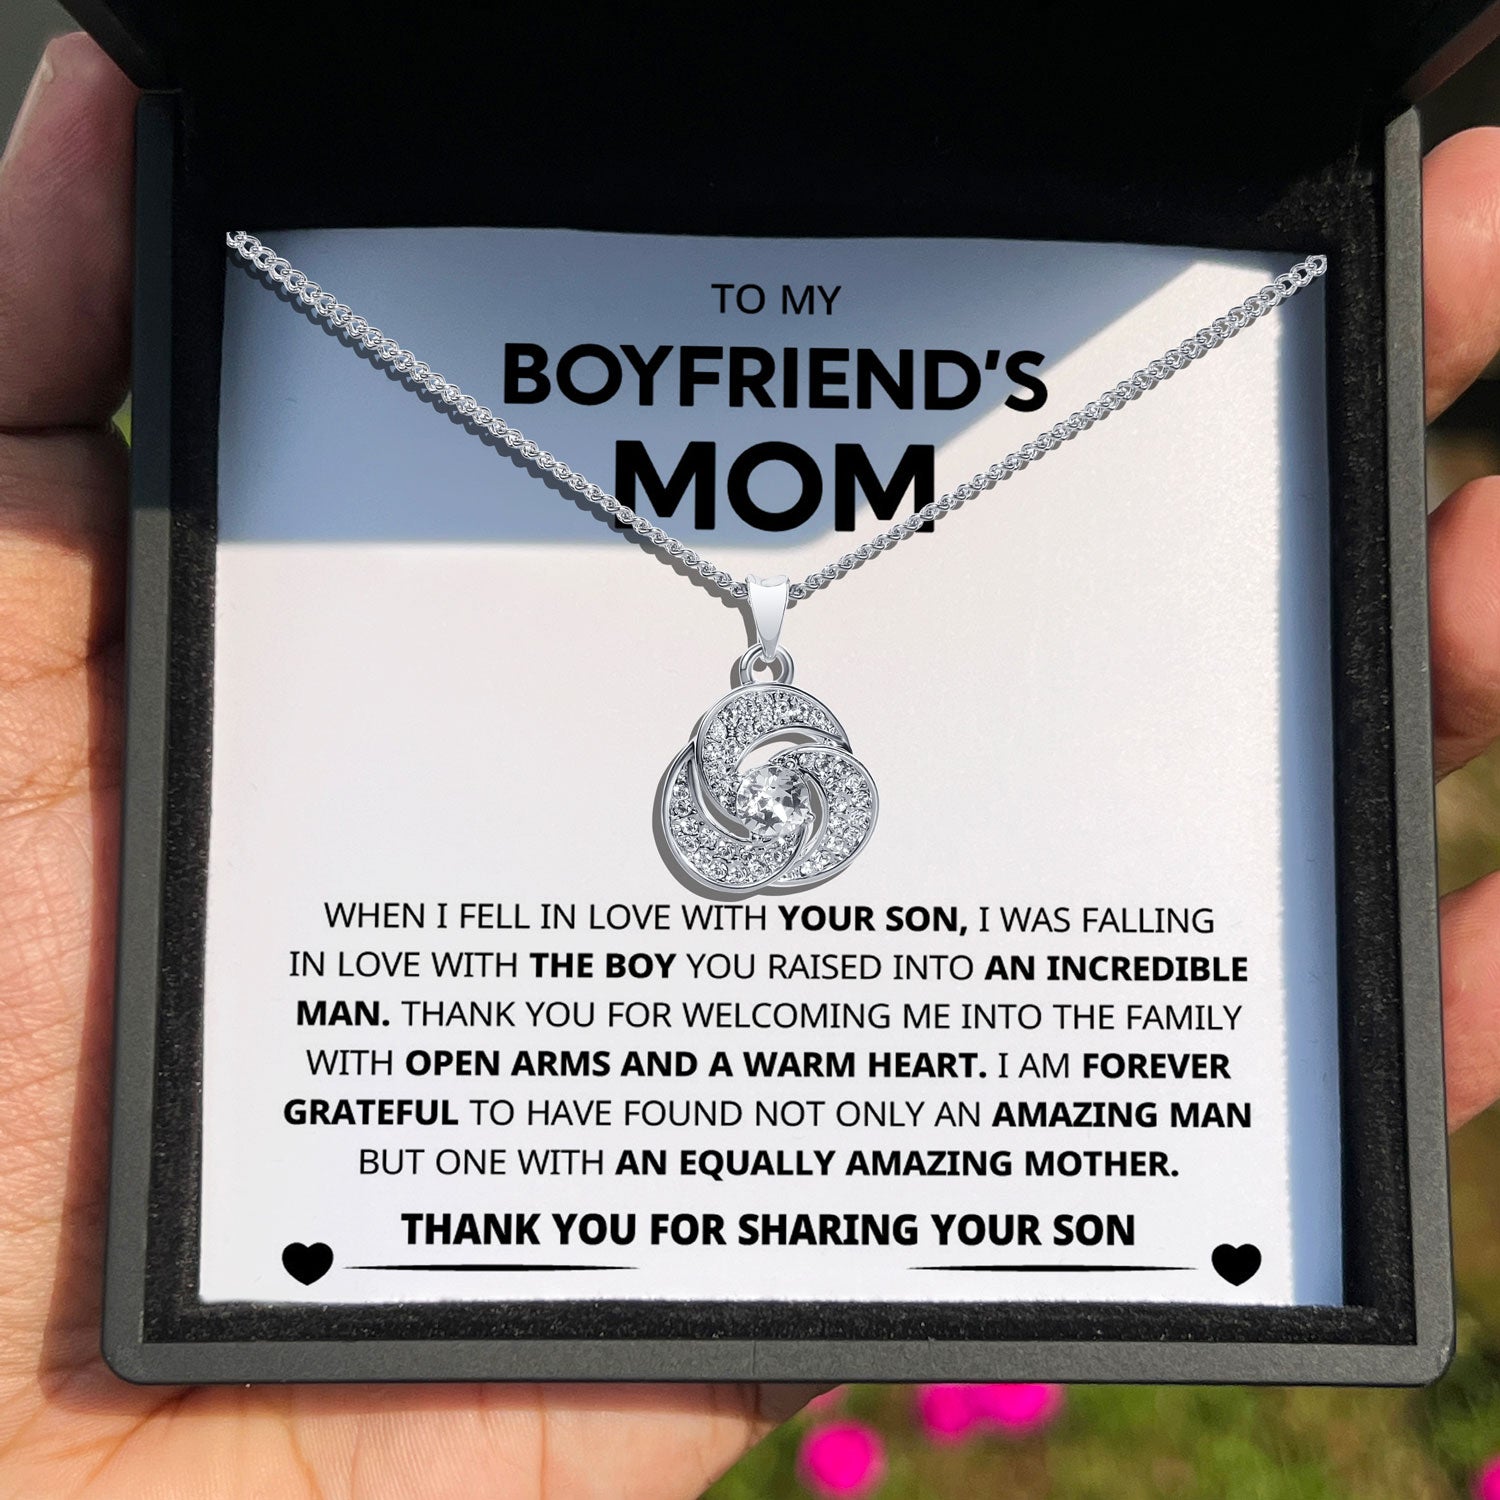 To My Boyfriend's Mom - Thank You For Welcoming Me Into The Family - Tryndi Love Knot Necklace